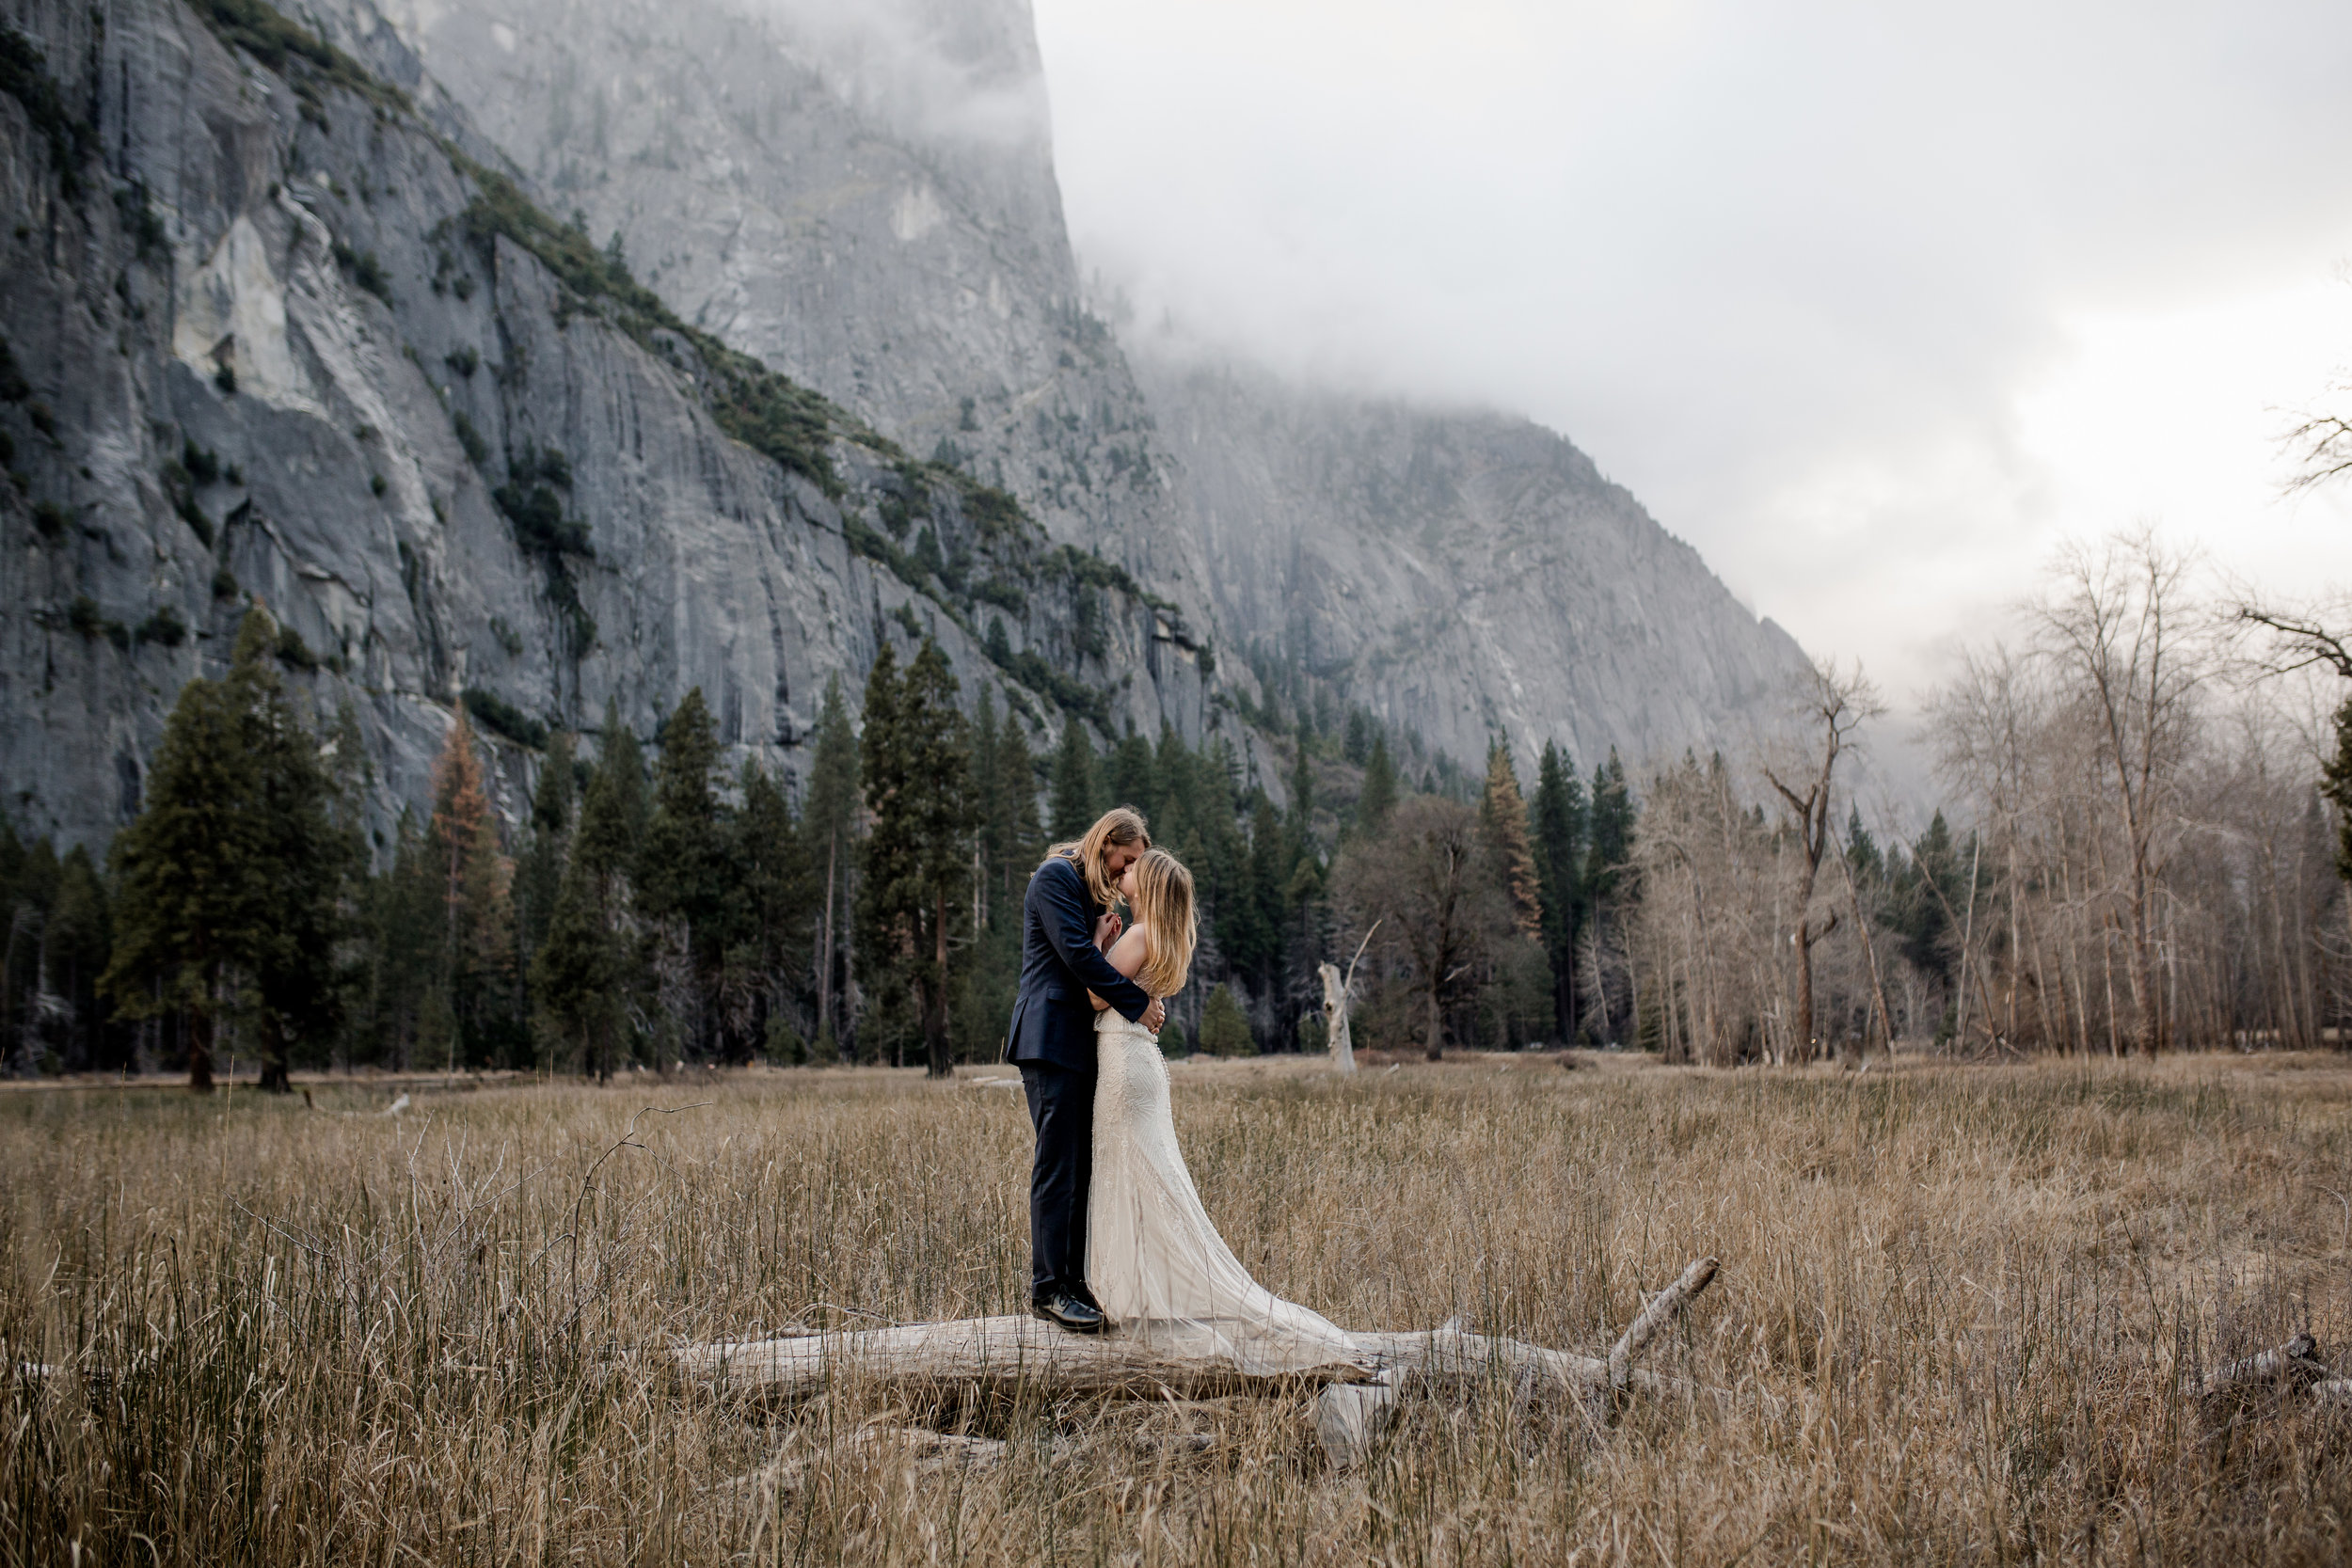 nicole-daacke-photography-yousemite-national-park-elopement-photographer-winter-cloud-moody-elope-inspiration-yosemite-valley-tunnel-view-winter-cloud-fog-weather-wedding-photos-78.jpg